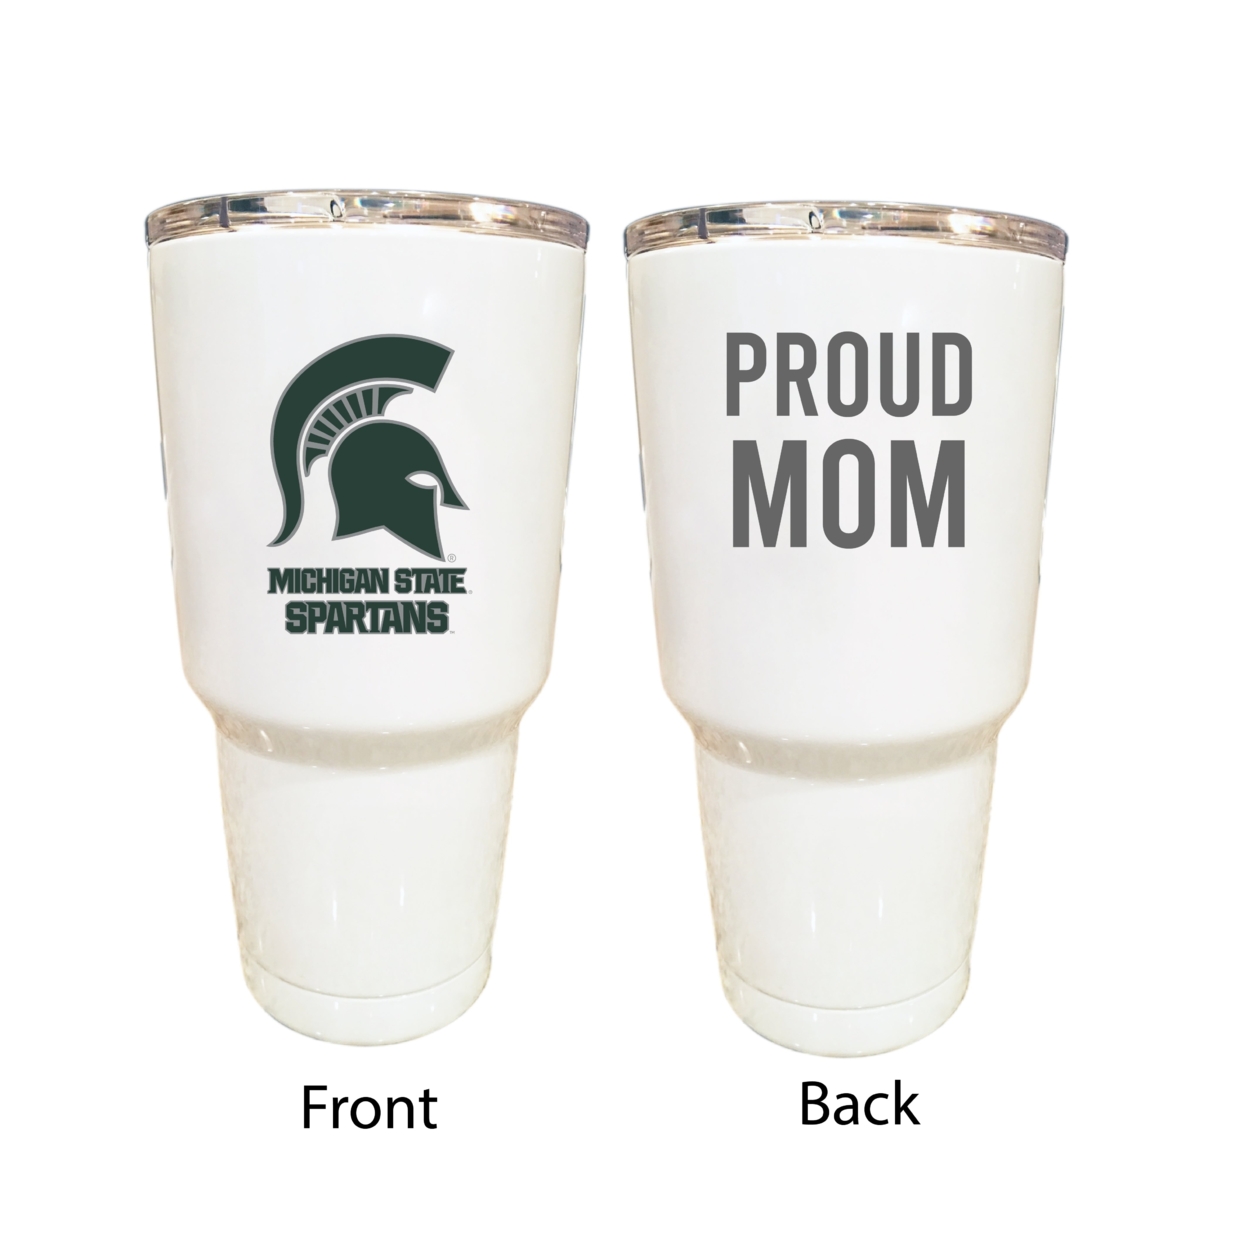 Michigan State Spartans Proud Mom 24 Oz Insulated Stainless Steel Tumblers Choose Your Color.